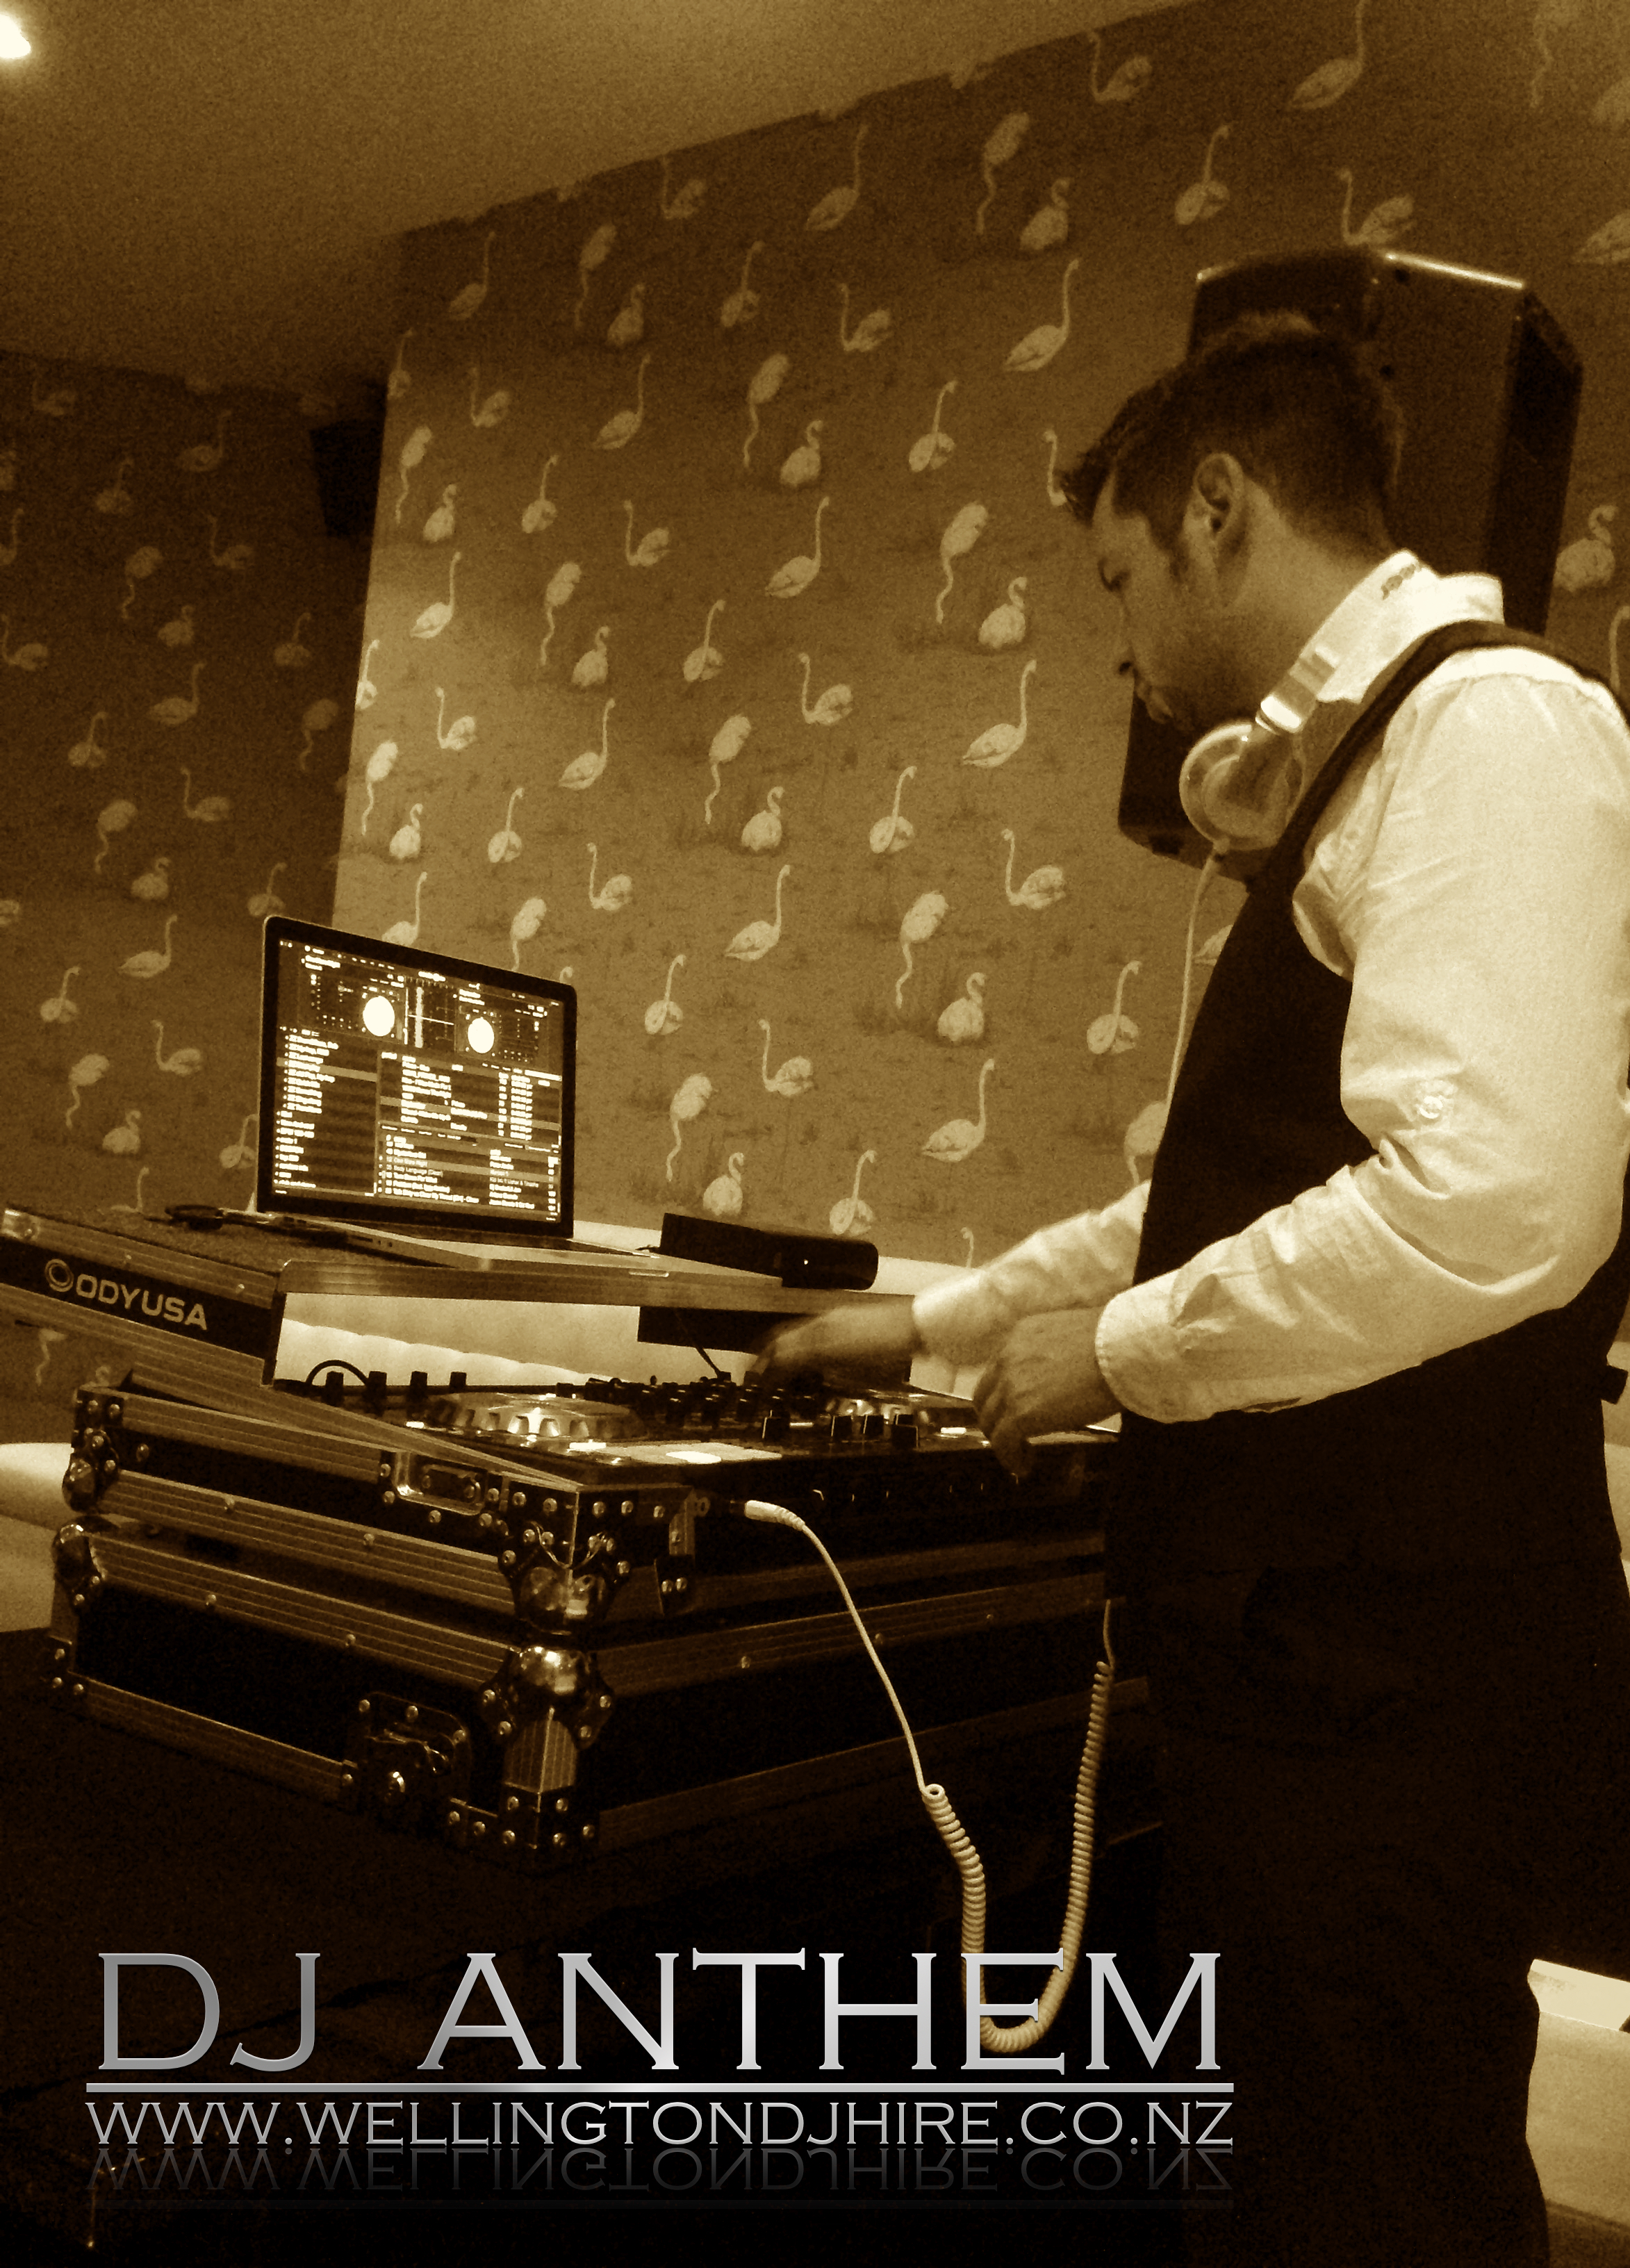 DJ Anthem Working at a private party.jpg